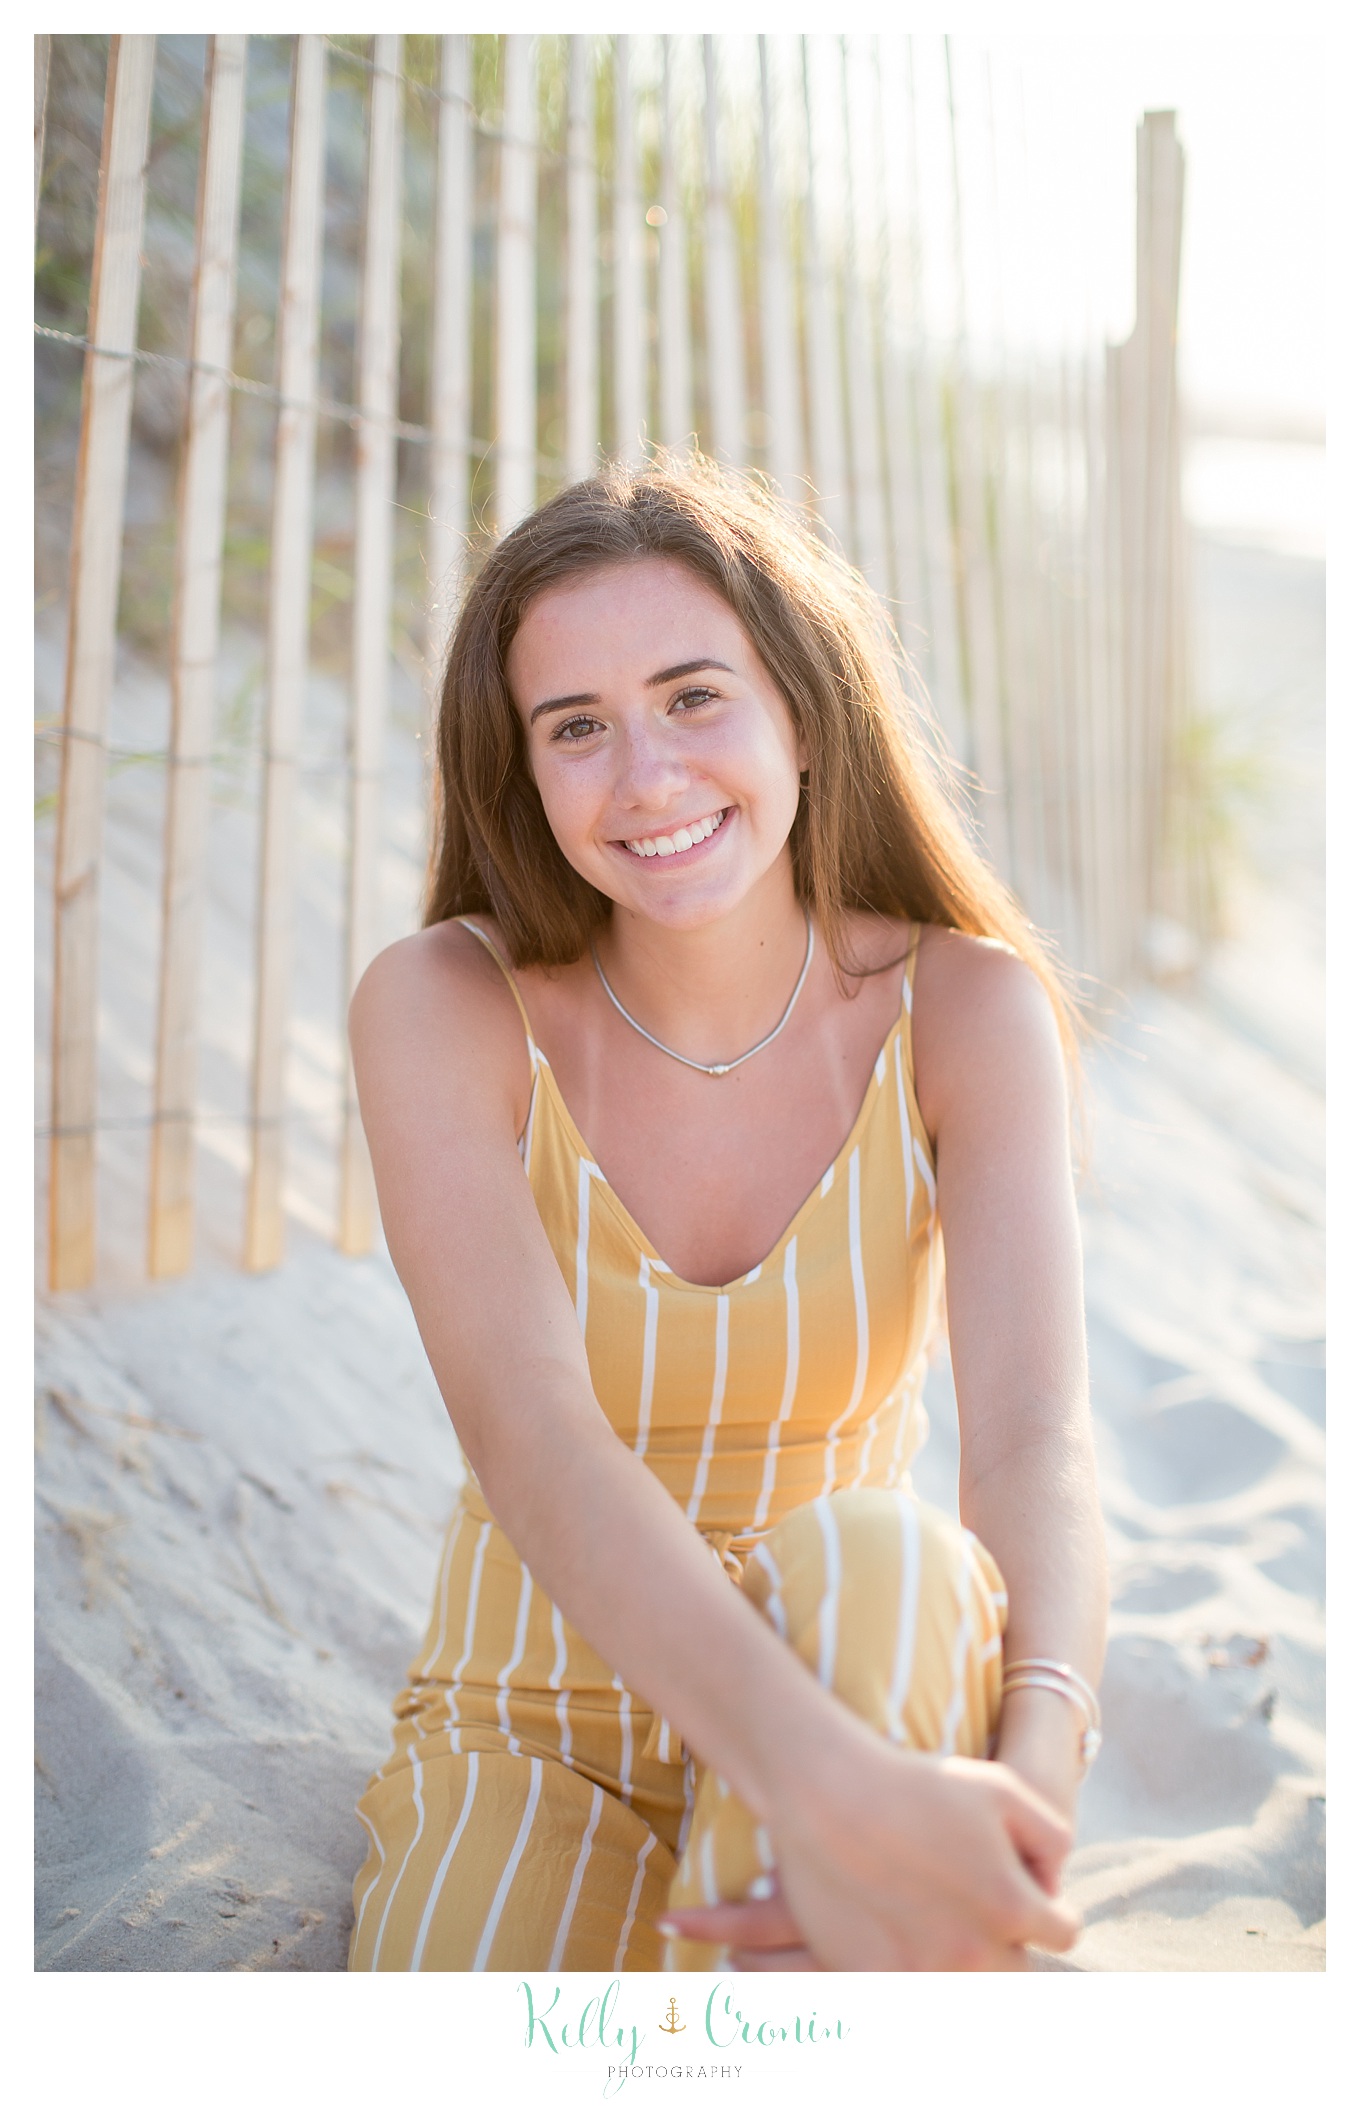 A young lady wearing yellow smiles for her senior portraits.